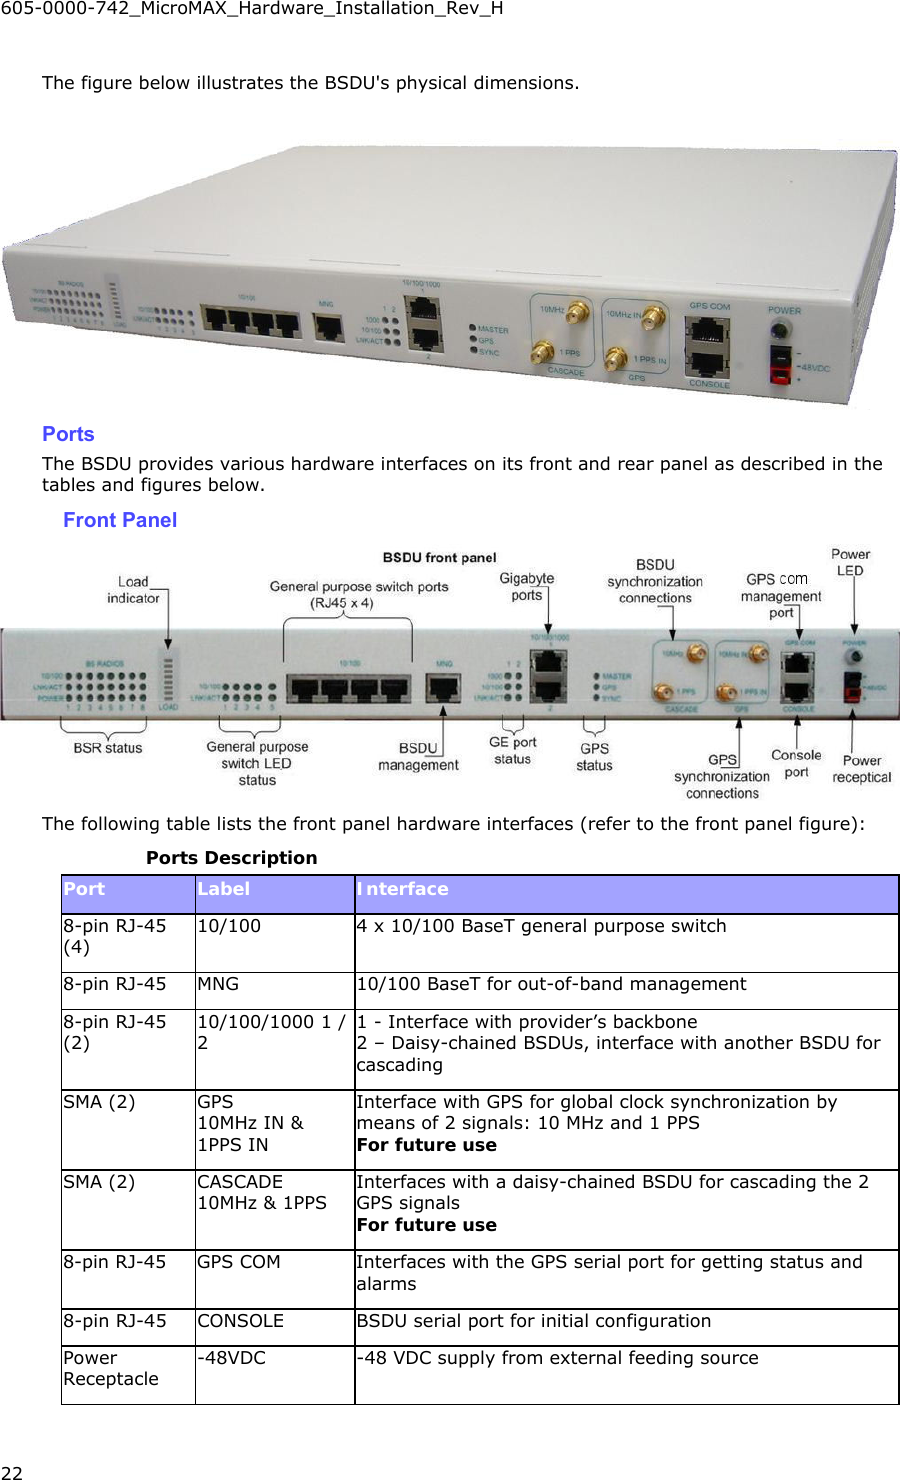 605-0000-742_MicroMAX_Hardware_Installation_Rev_H 22    The figure below illustrates the BSDU&apos;s physical dimensions.   Ports The BSDU provides various hardware interfaces on its front and rear panel as described in the tables and figures below. Front Panel  The following table lists the front panel hardware interfaces (refer to the front panel figure):   Ports Description Port  Label  Interface 8-pin RJ-45 (4) 10/100  4 x 10/100 BaseT general purpose switch 8-pin RJ-45  MNG  10/100 BaseT for out-of-band management 8-pin RJ-45 (2) 10/100/1000 1 / 2 1 - Interface with provider’s backbone  2 – Daisy-chained BSDUs, interface with another BSDU for cascading SMA (2)  GPS 10MHz IN &amp; 1PPS IN Interface with GPS for global clock synchronization by means of 2 signals: 10 MHz and 1 PPS For future use SMA (2)  CASCADE 10MHz &amp; 1PPS Interfaces with a daisy-chained BSDU for cascading the 2 GPS signals For future use 8-pin RJ-45  GPS COM  Interfaces with the GPS serial port for getting status and alarms 8-pin RJ-45  CONSOLE  BSDU serial port for initial configuration Power Receptacle -48VDC  -48 VDC supply from external feeding source 